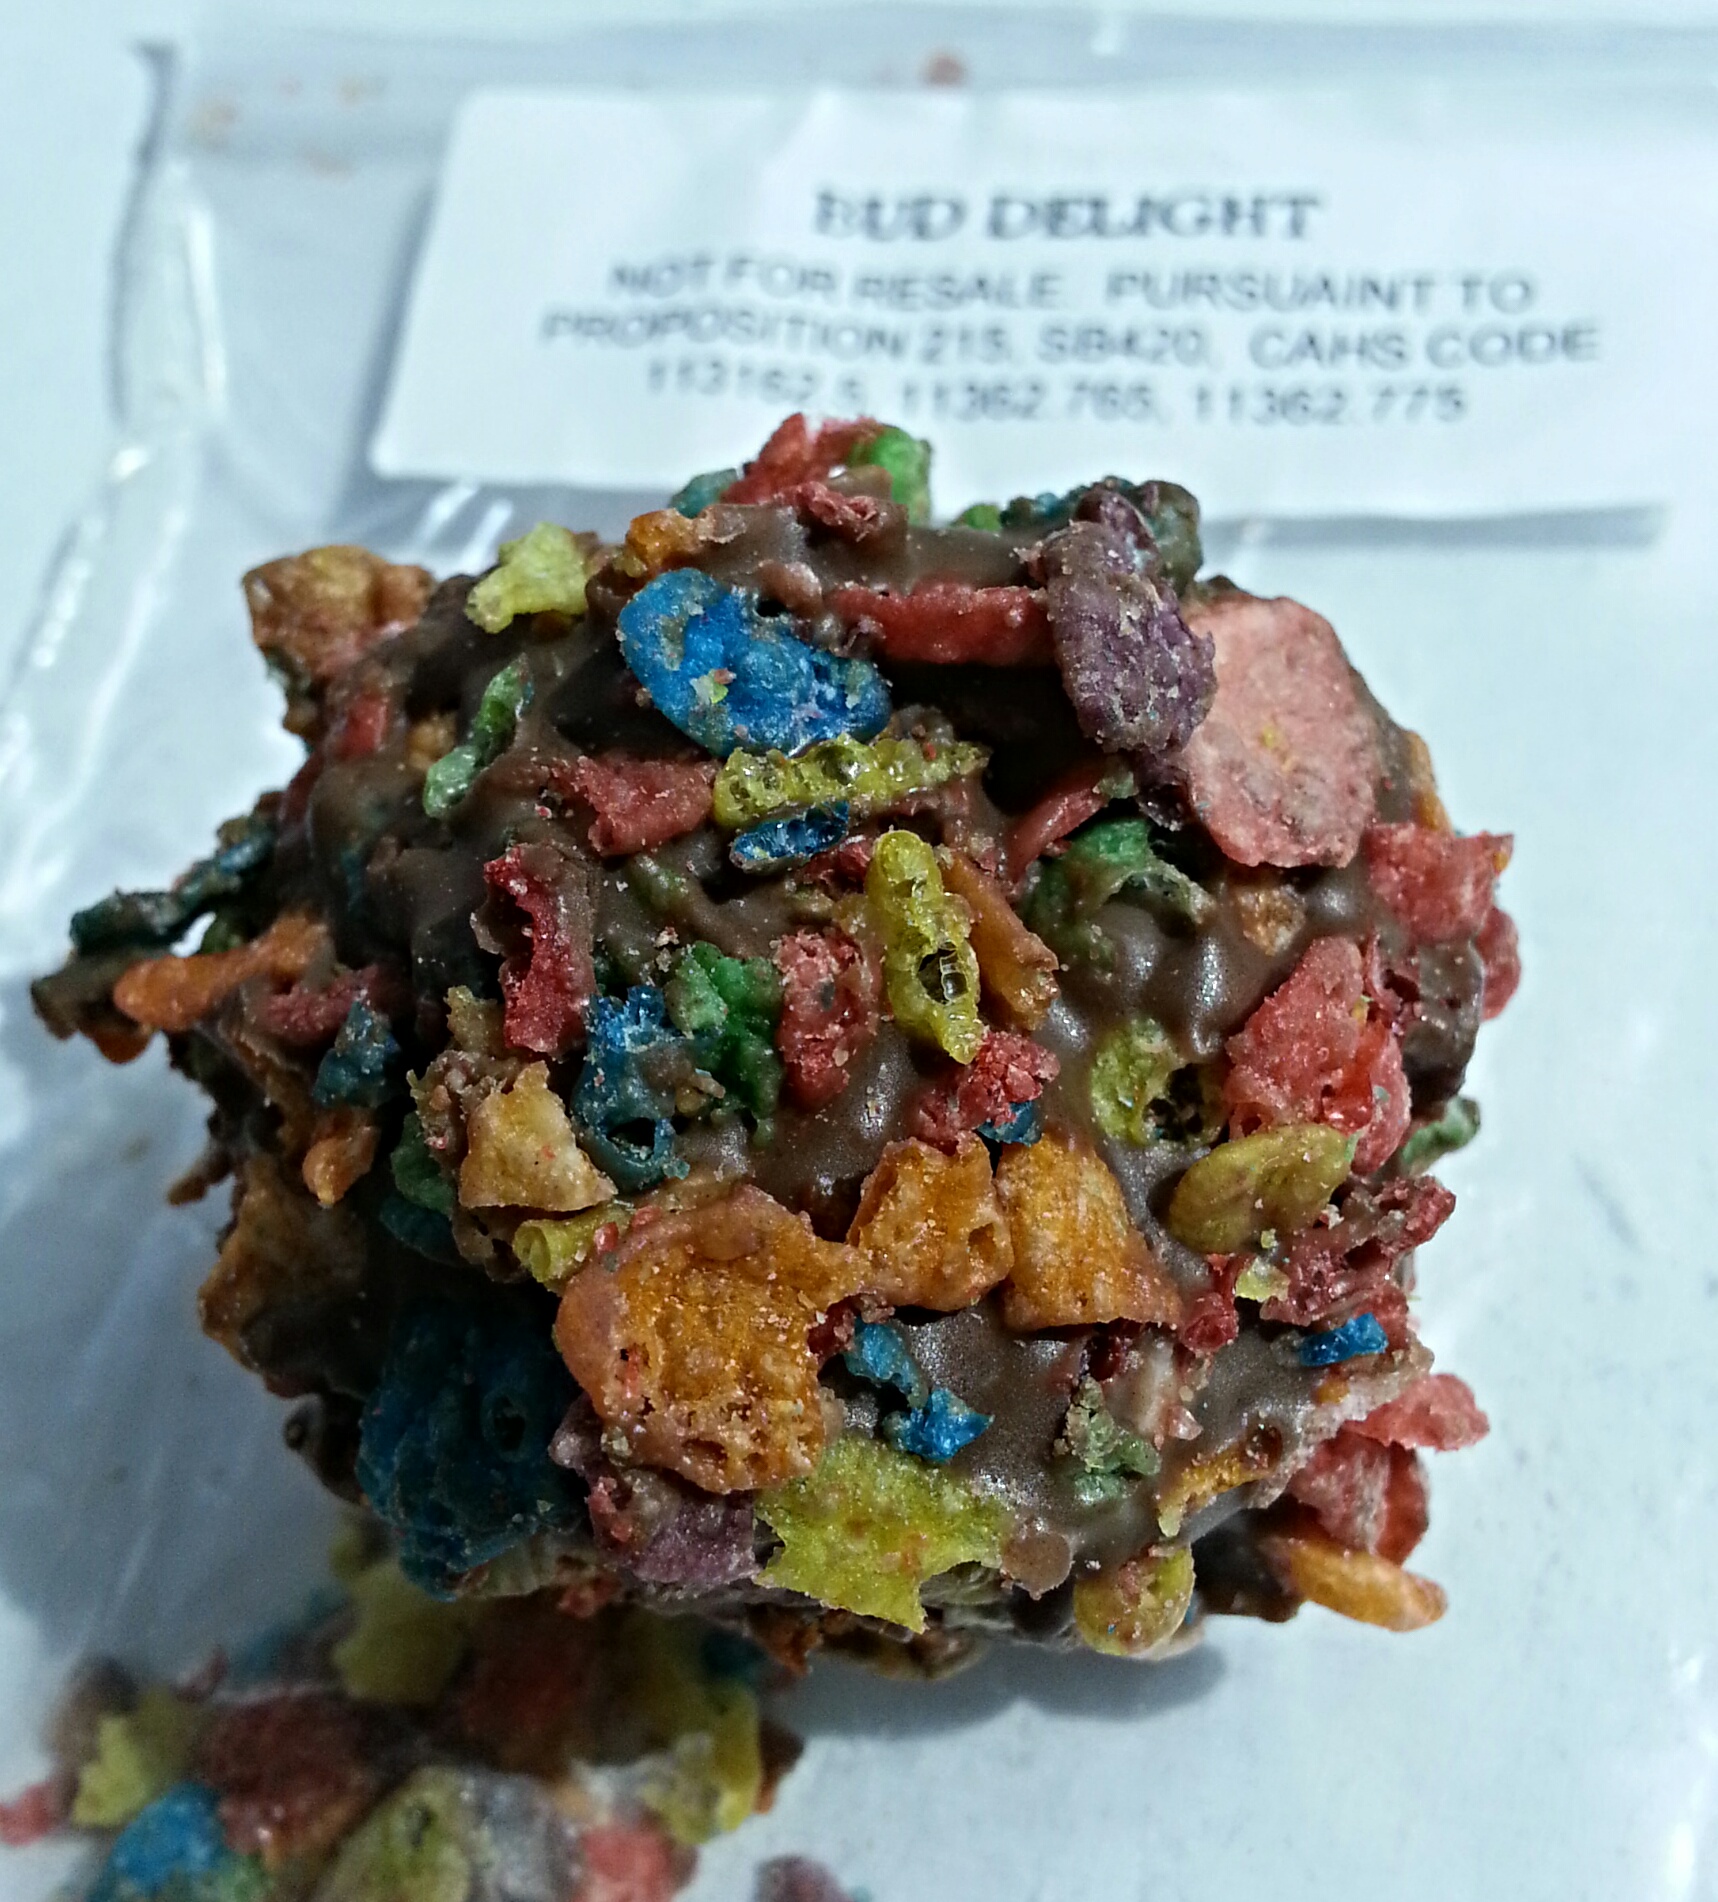 Peanut Butter and Fruity Pebbles Bud Delight Edible Review